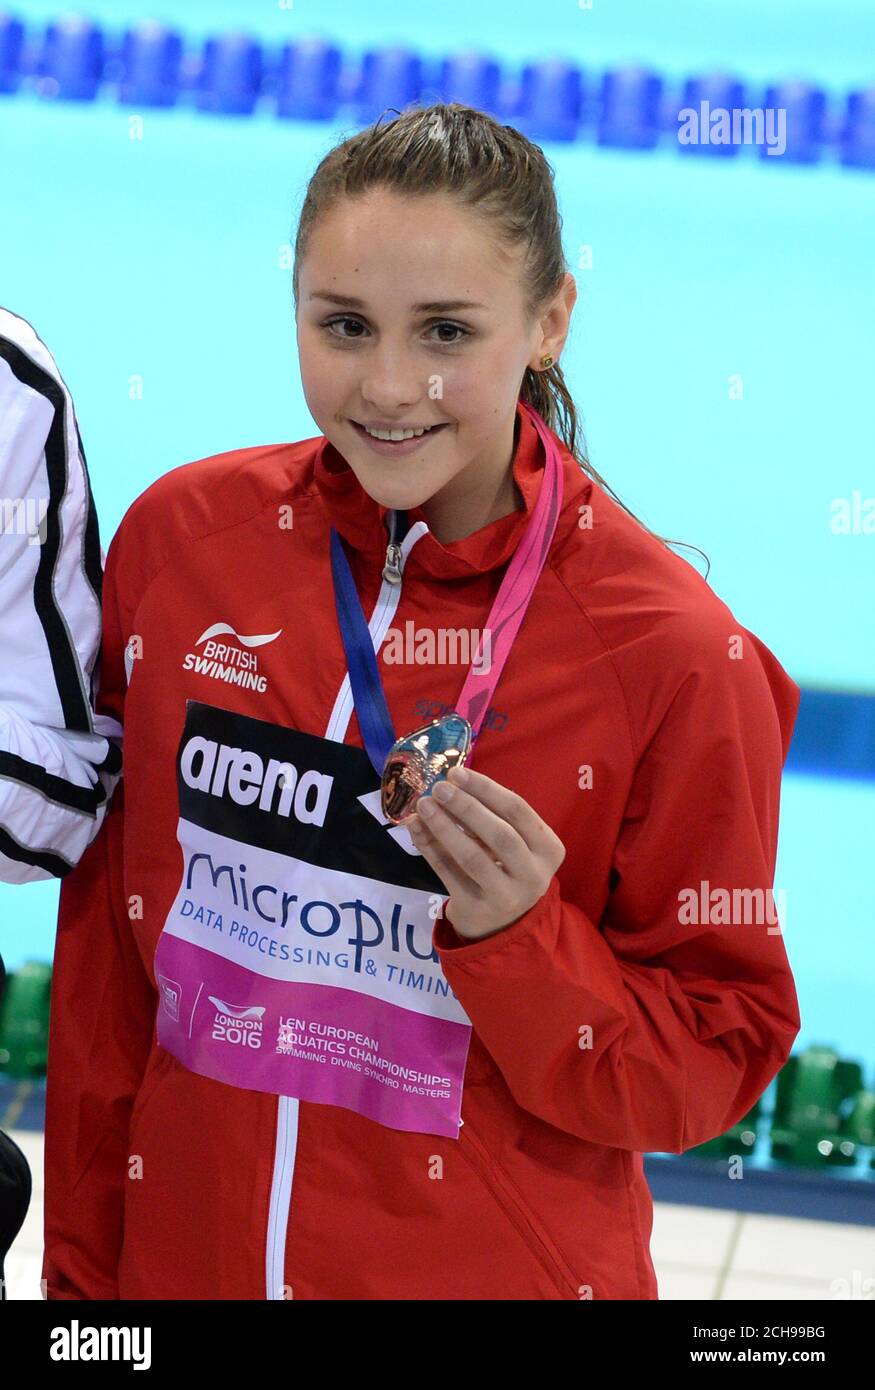 Great Britain's Chloe Tutton with her bronze medal for the Women's 100m Breaststroke Finalduring day ten of the European Aquatics Championships at the London Aquatics Centre, Stratford. Stock Photo